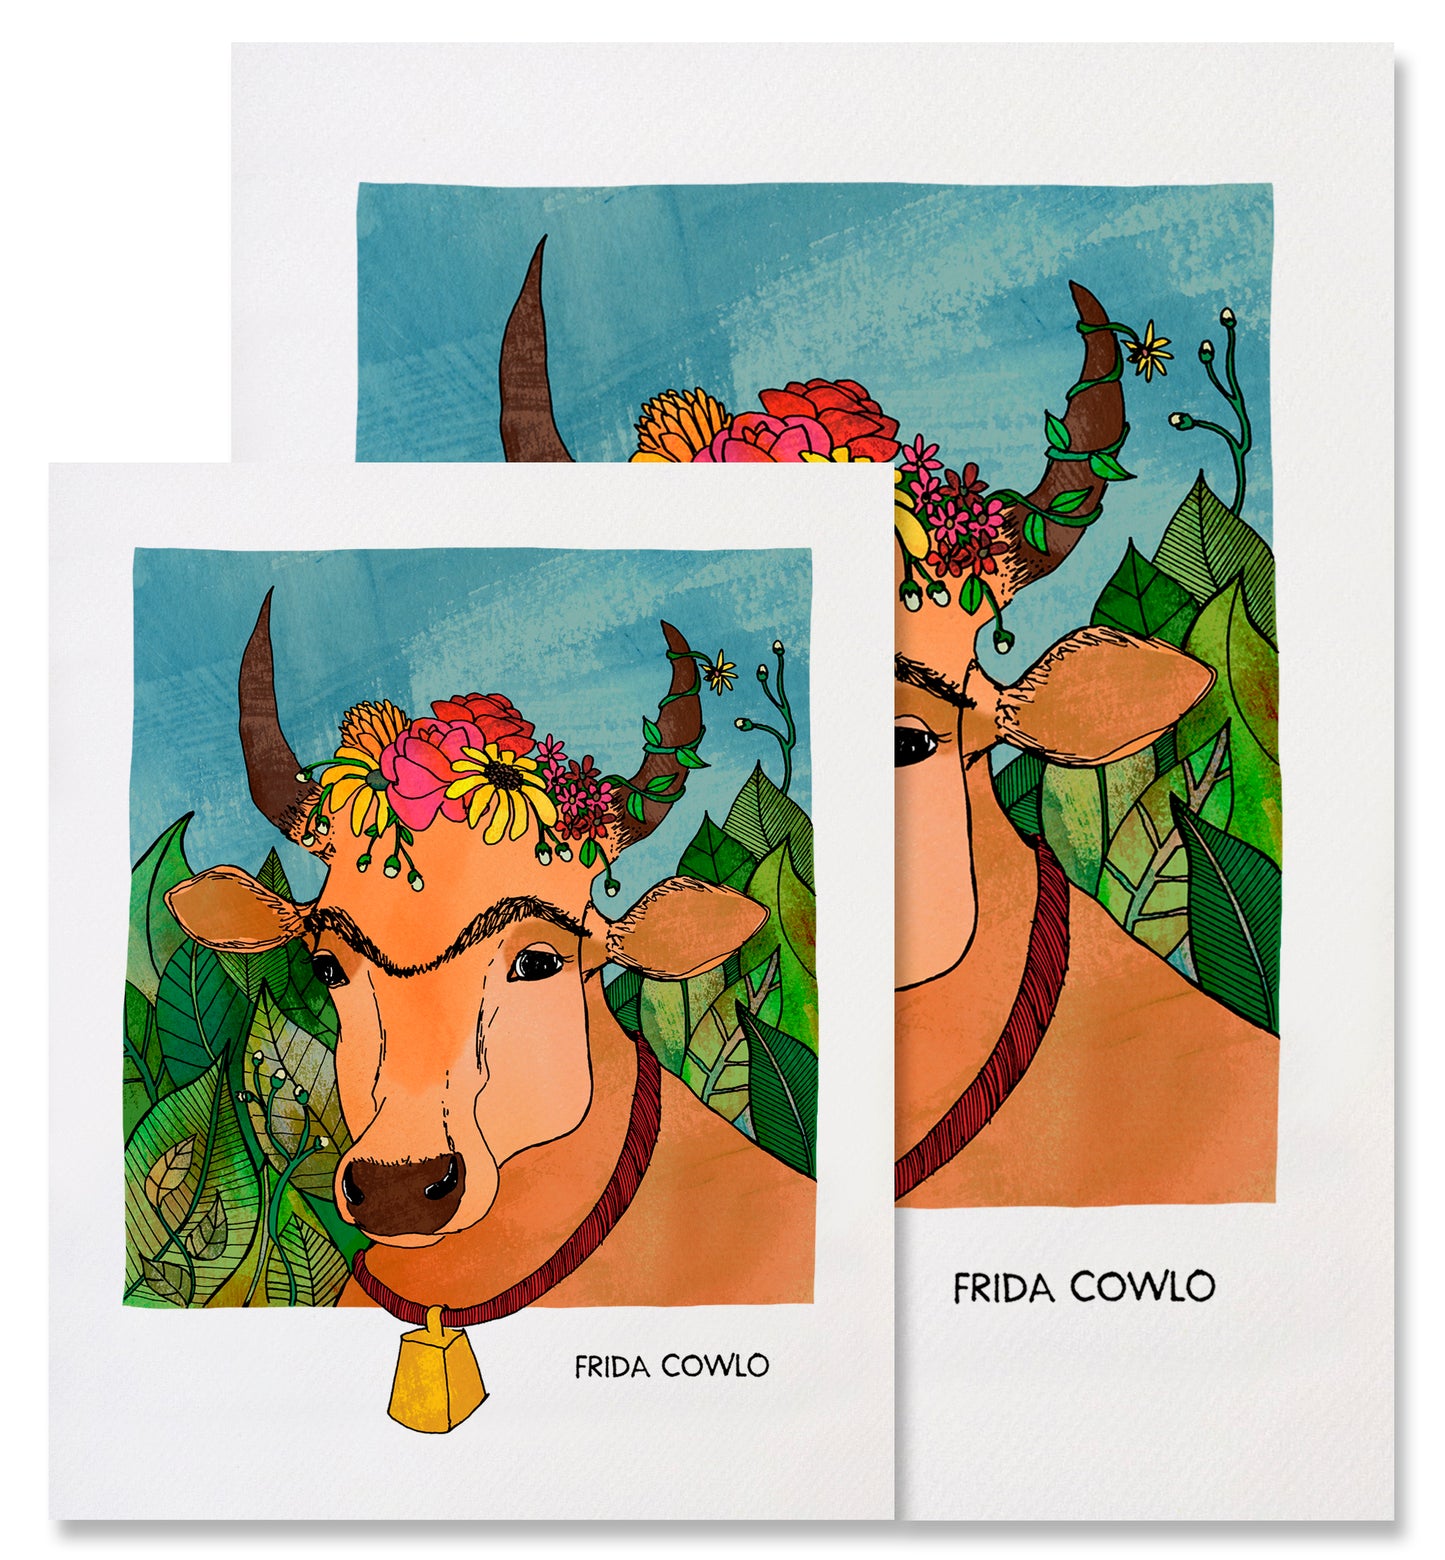 This image shows the two different sizes available for the Frida Cowlo print - 8x10in and 11x14in. The Frida Cowlo fine art prints depict a portrait of Frida Kahlo as a tan cow with a unibrow and flowers along the top of her head between her horns. A vine with a flower twirls its way up the right-side horn. The cow is also wearing a cow bell that hangs on a red collar. The cow is in front of a wall of lush, green foliage and blue sky. 